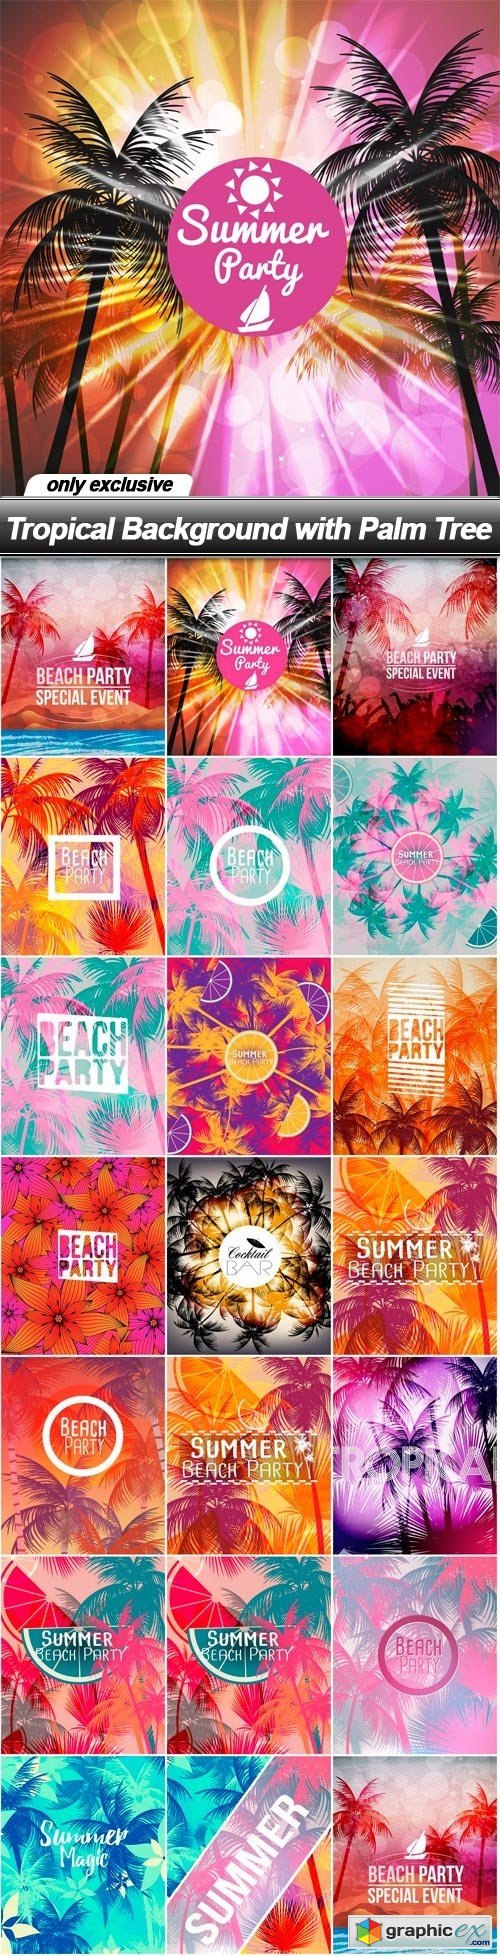 Tropical Background with Palm Tree - 20 EPS